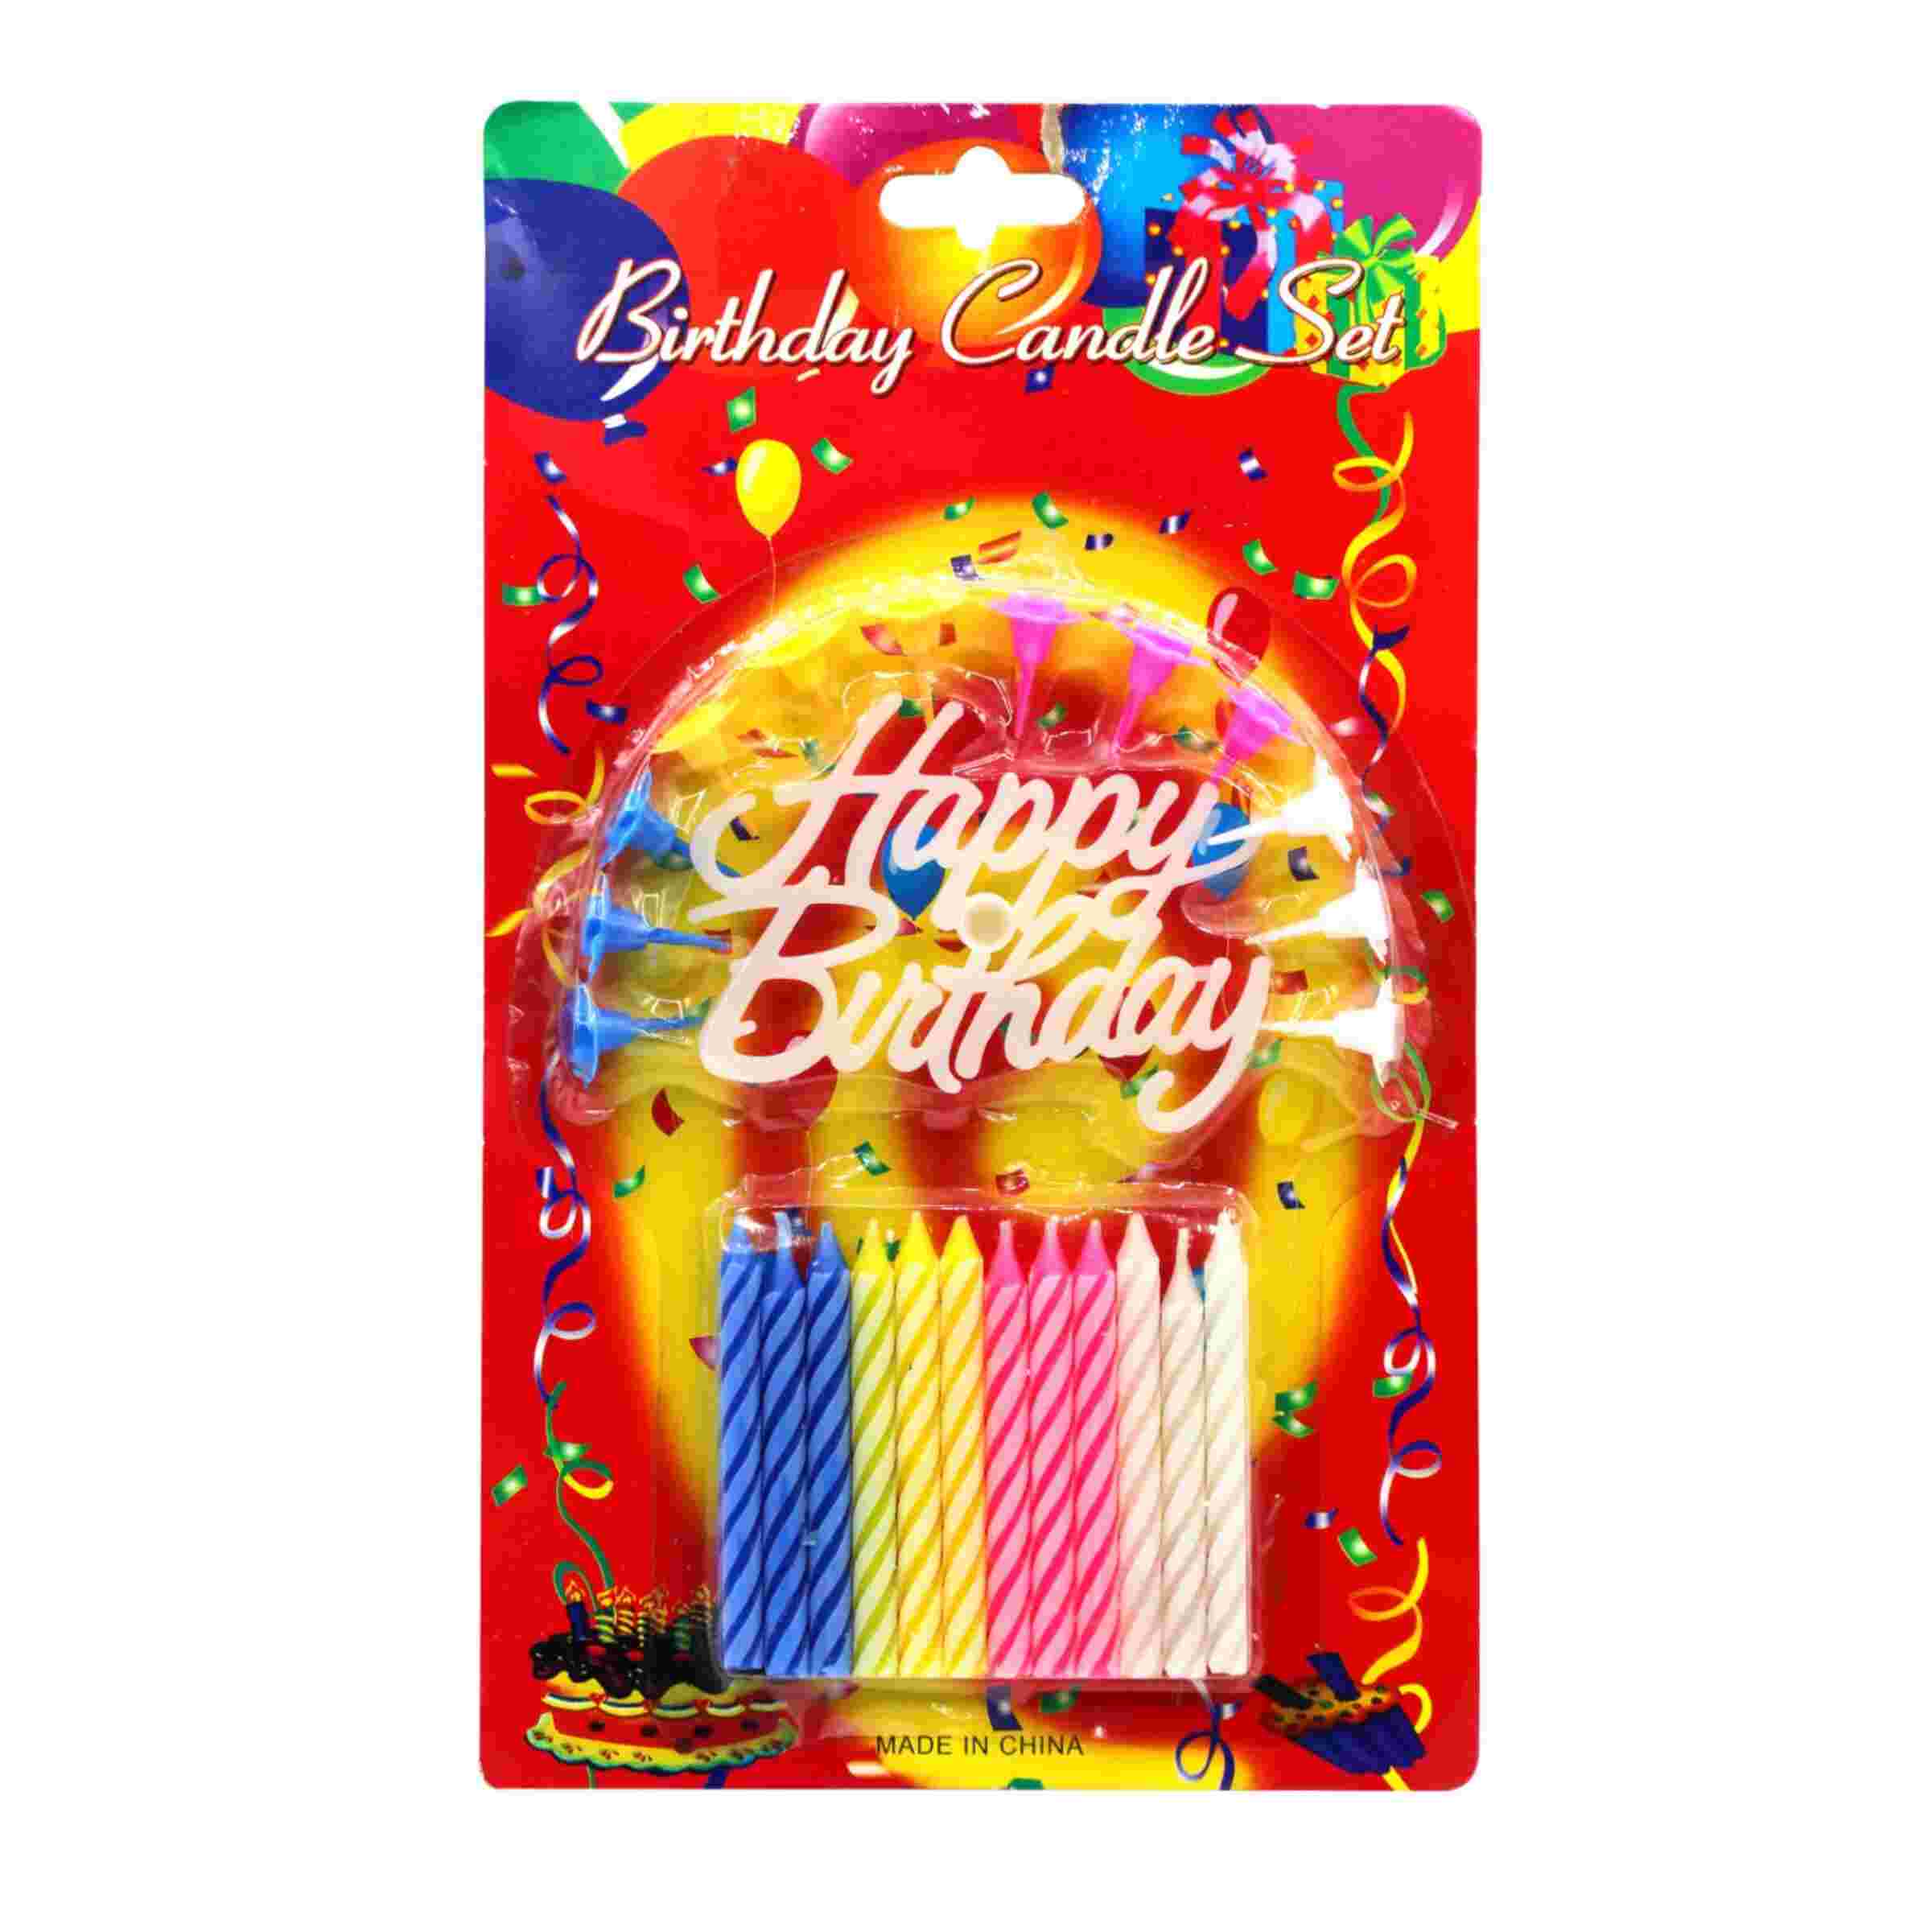 Birthday Candle Set colored